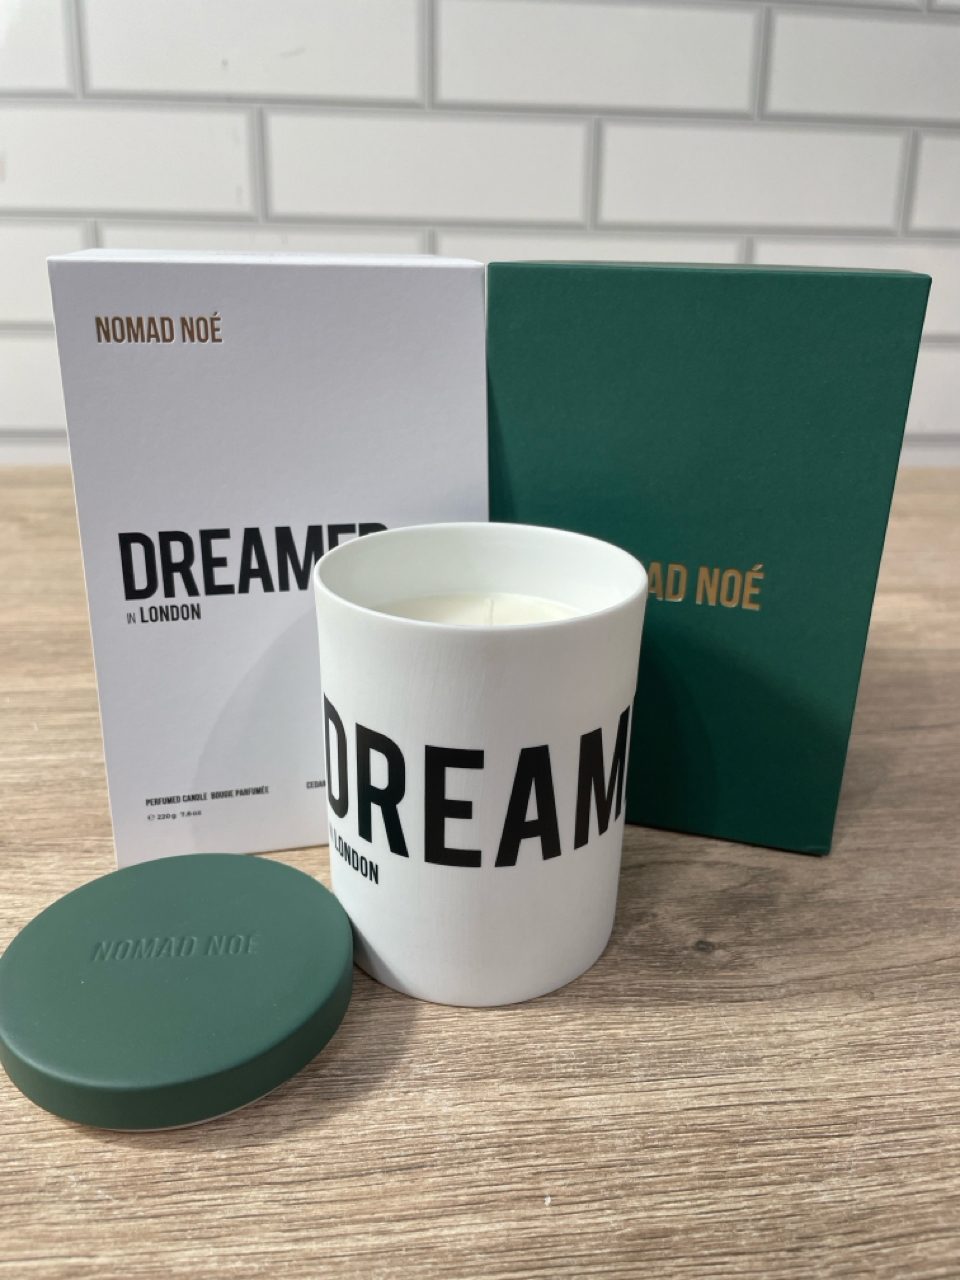 Dreamer Scented Candle from Nomad Noe - Image 3 of 4